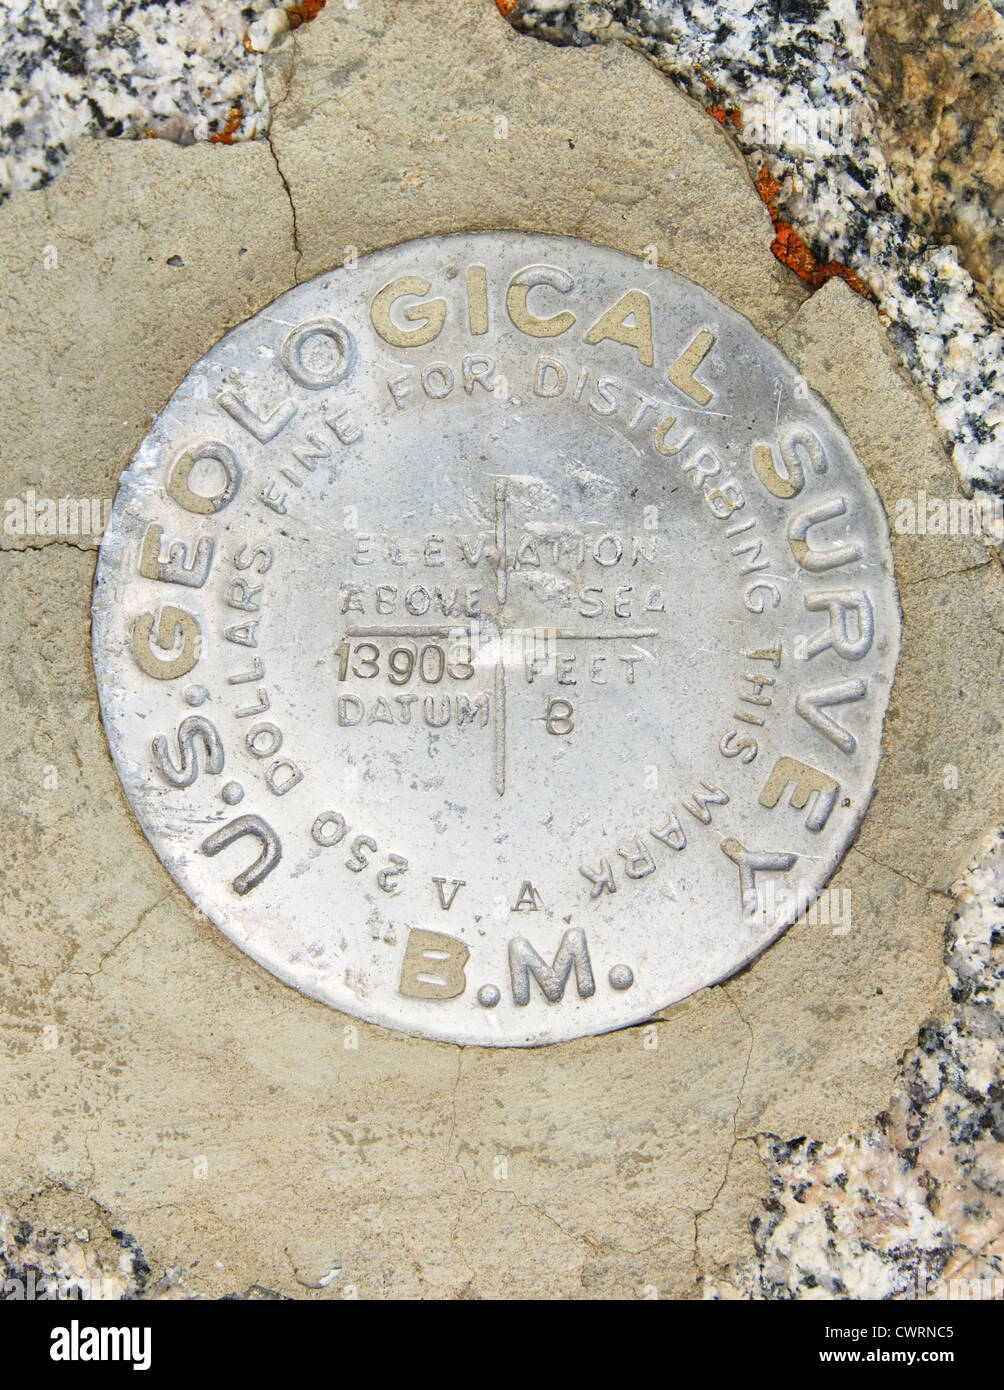 USGS bench mark on the 13903 foot summit of Junction Peak in the Sierra Nevada mountains Stock Photo